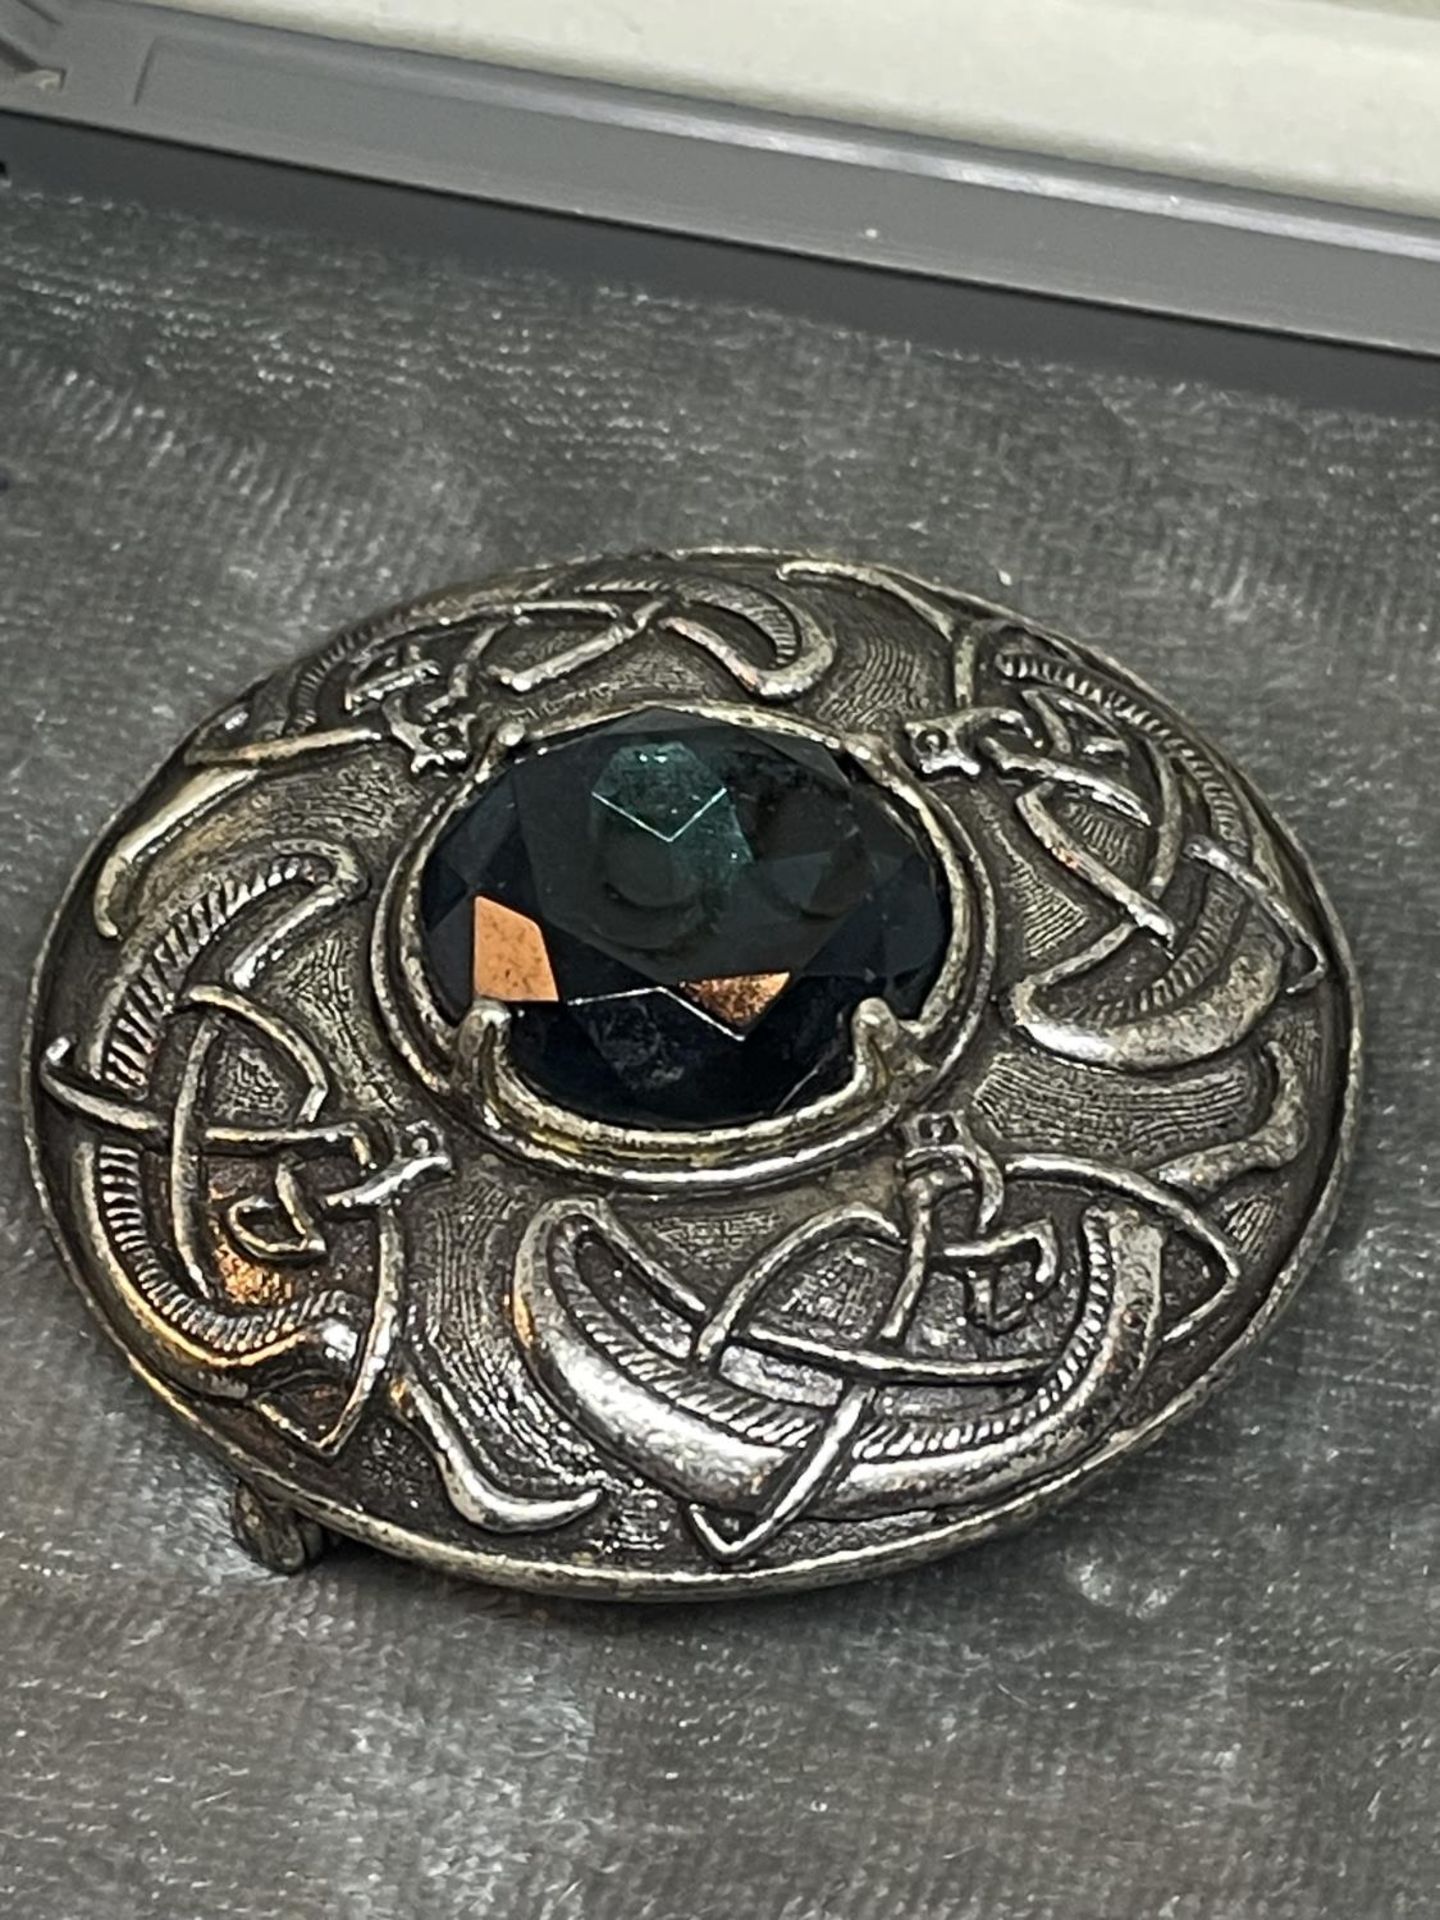 A CELTIC STYLE PEWTER BROOCH IN A PRESENTATION BOX - Image 2 of 4